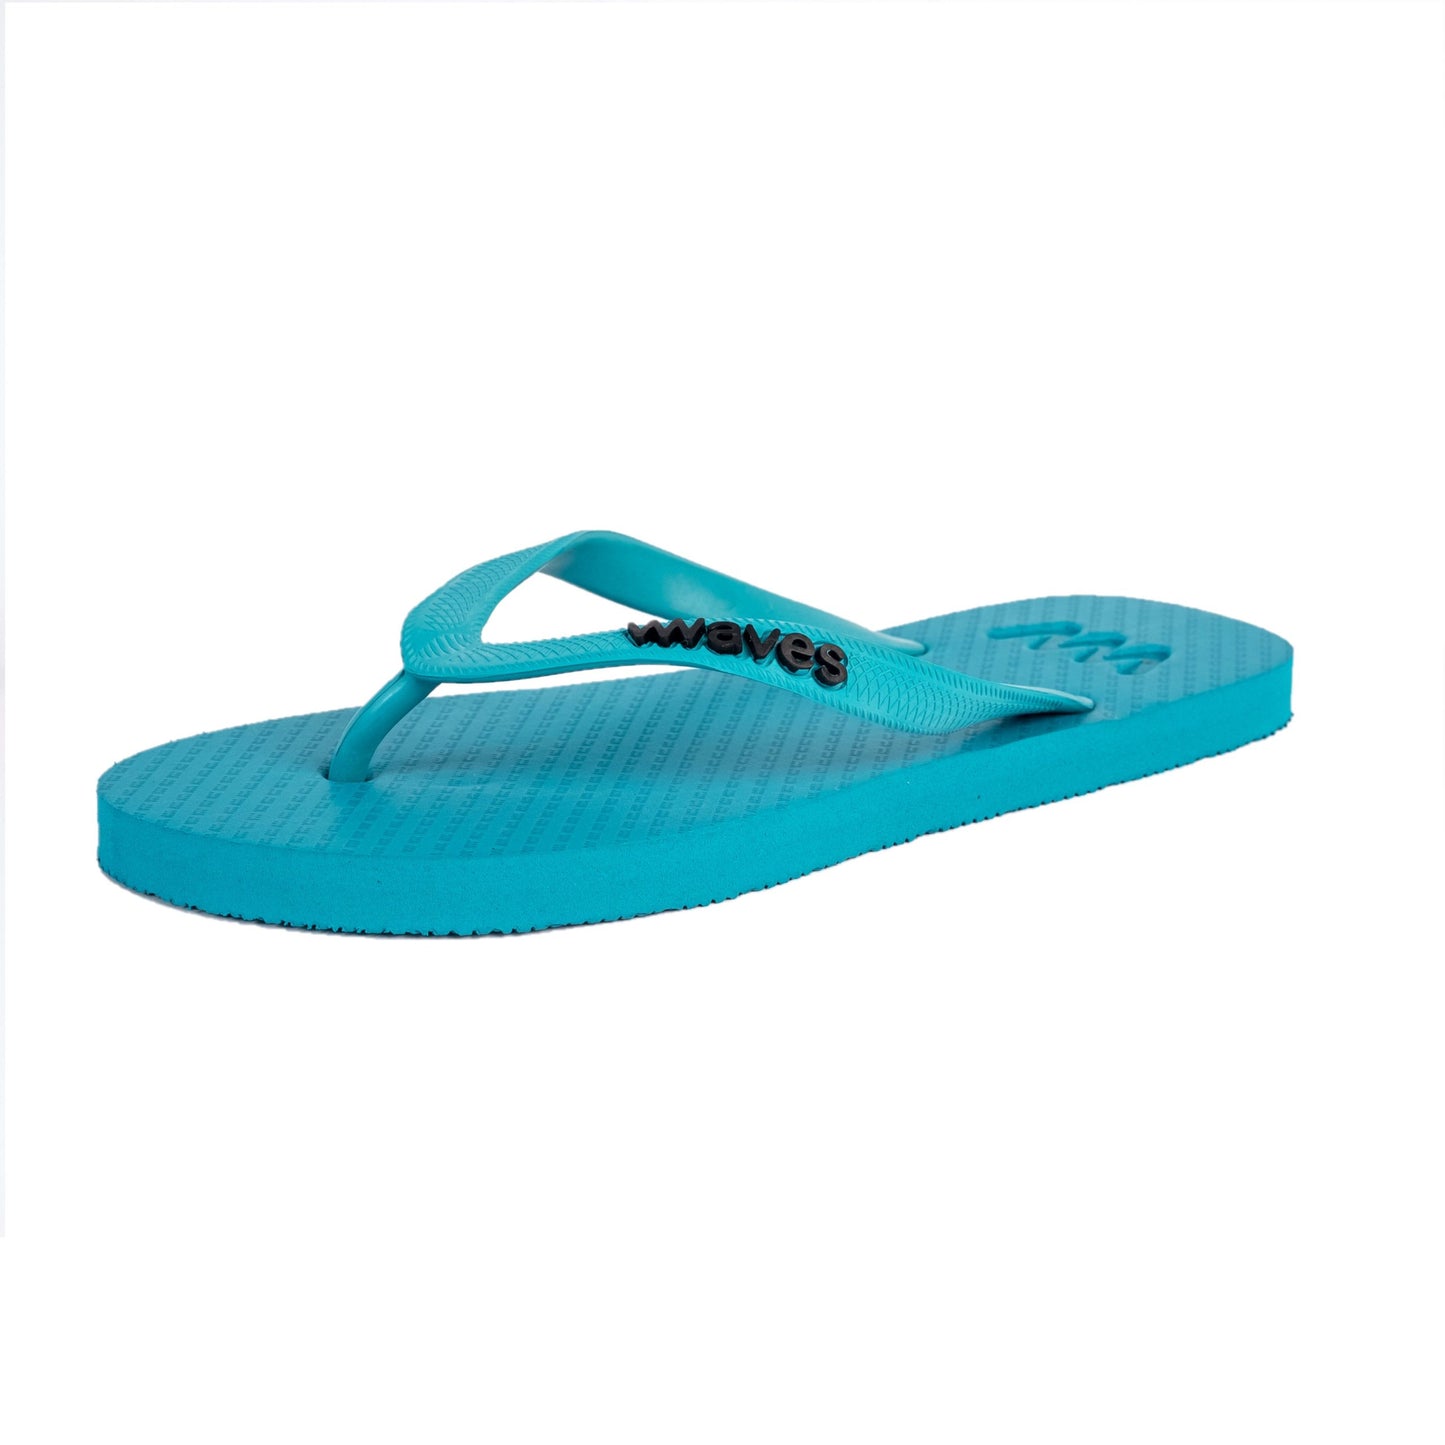 Waves Natural Rubber Flip Flop – Turquoise